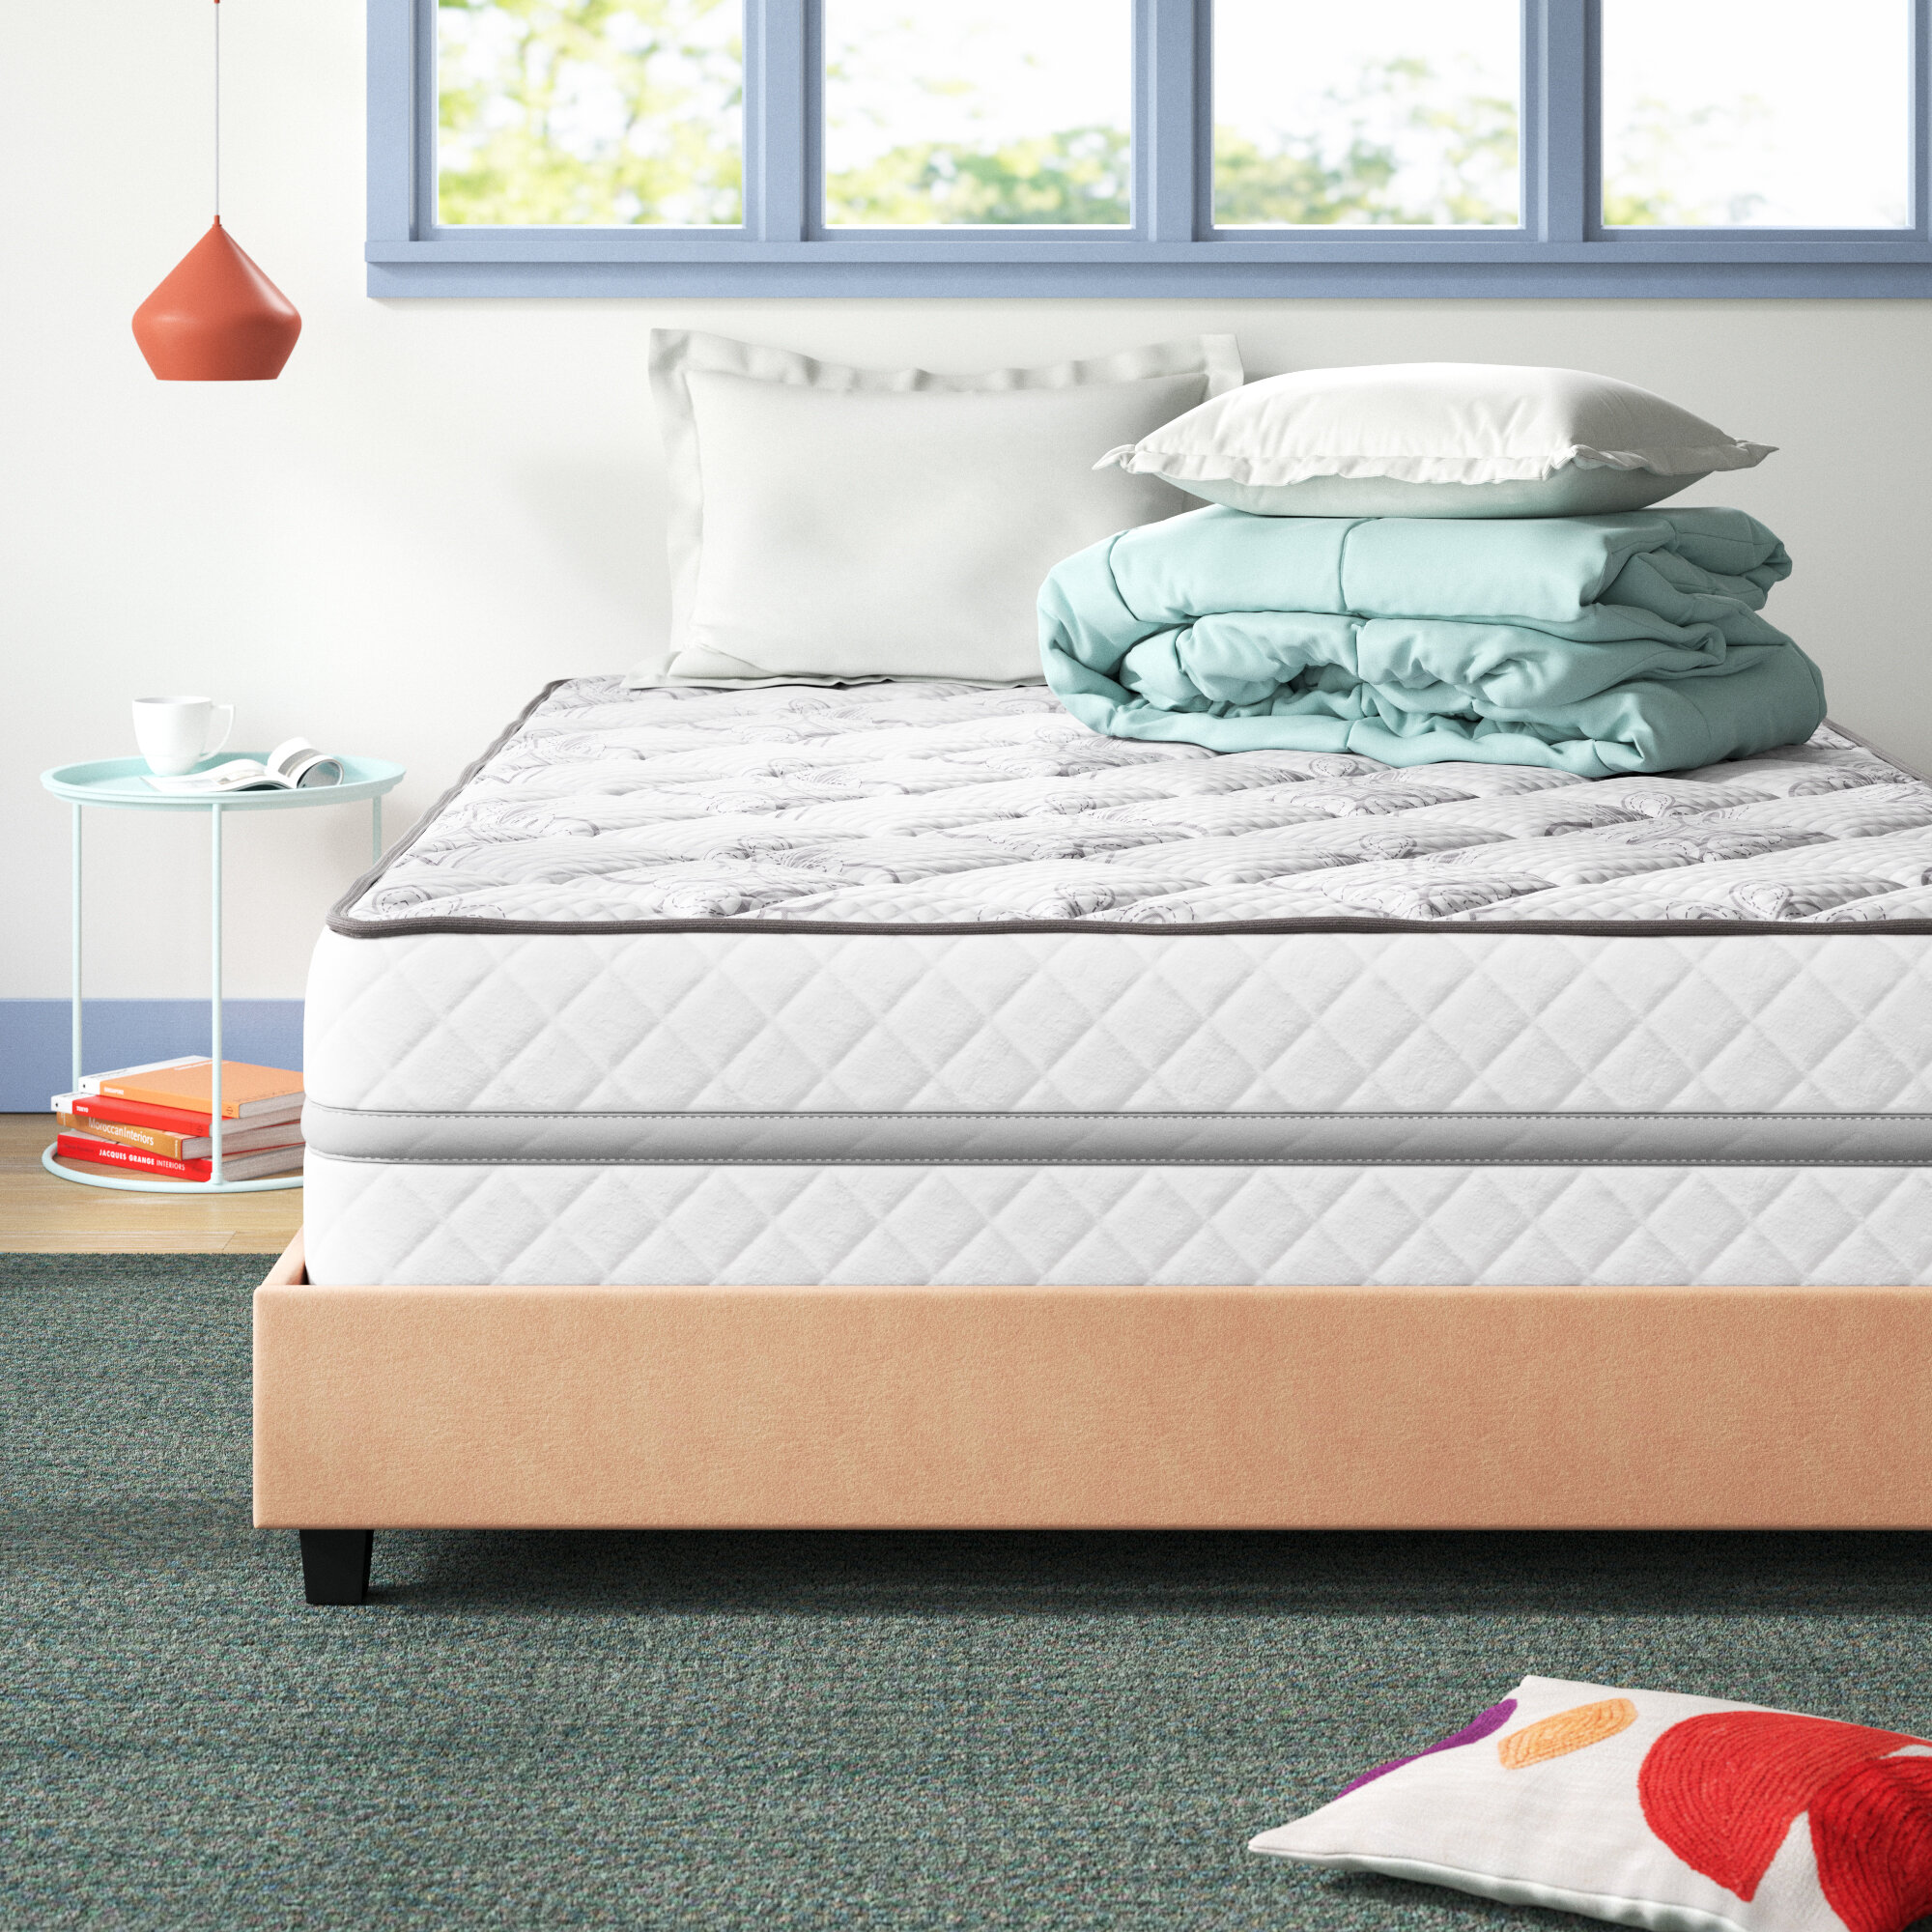 Modway Kate 8” Full Innerspring Mattress Firm Mattress For Child or Guest Ro 